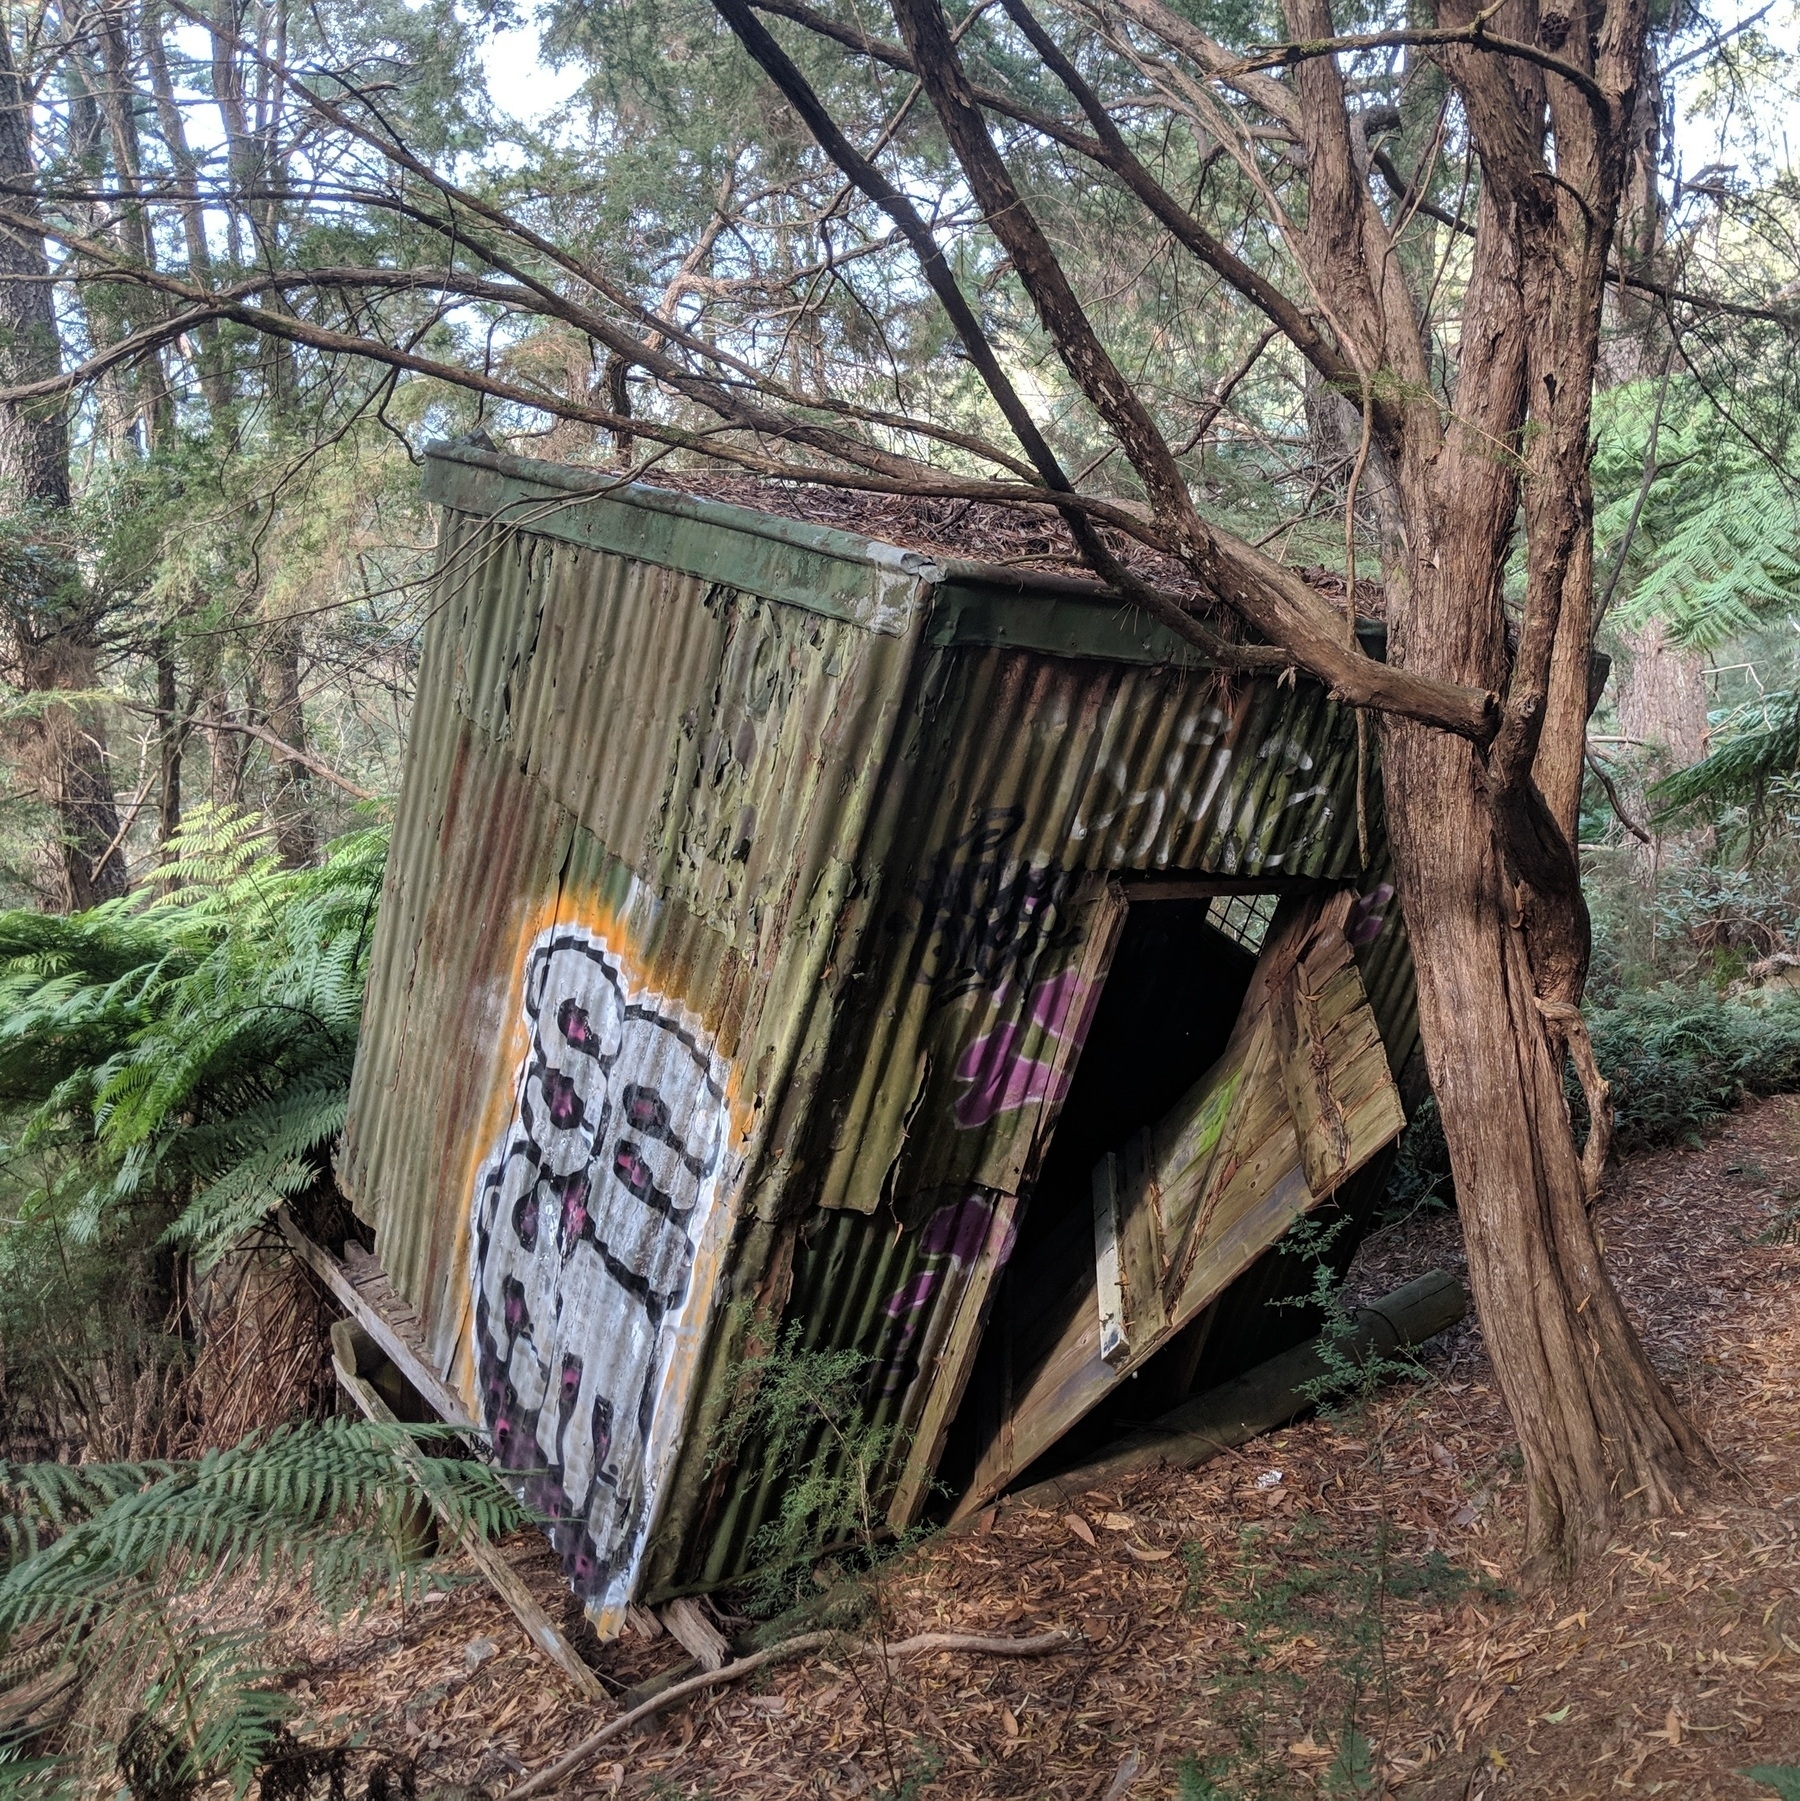 A shed in a forest leaning on a tree with some graffiti on the side and the door fallen off it's hinges